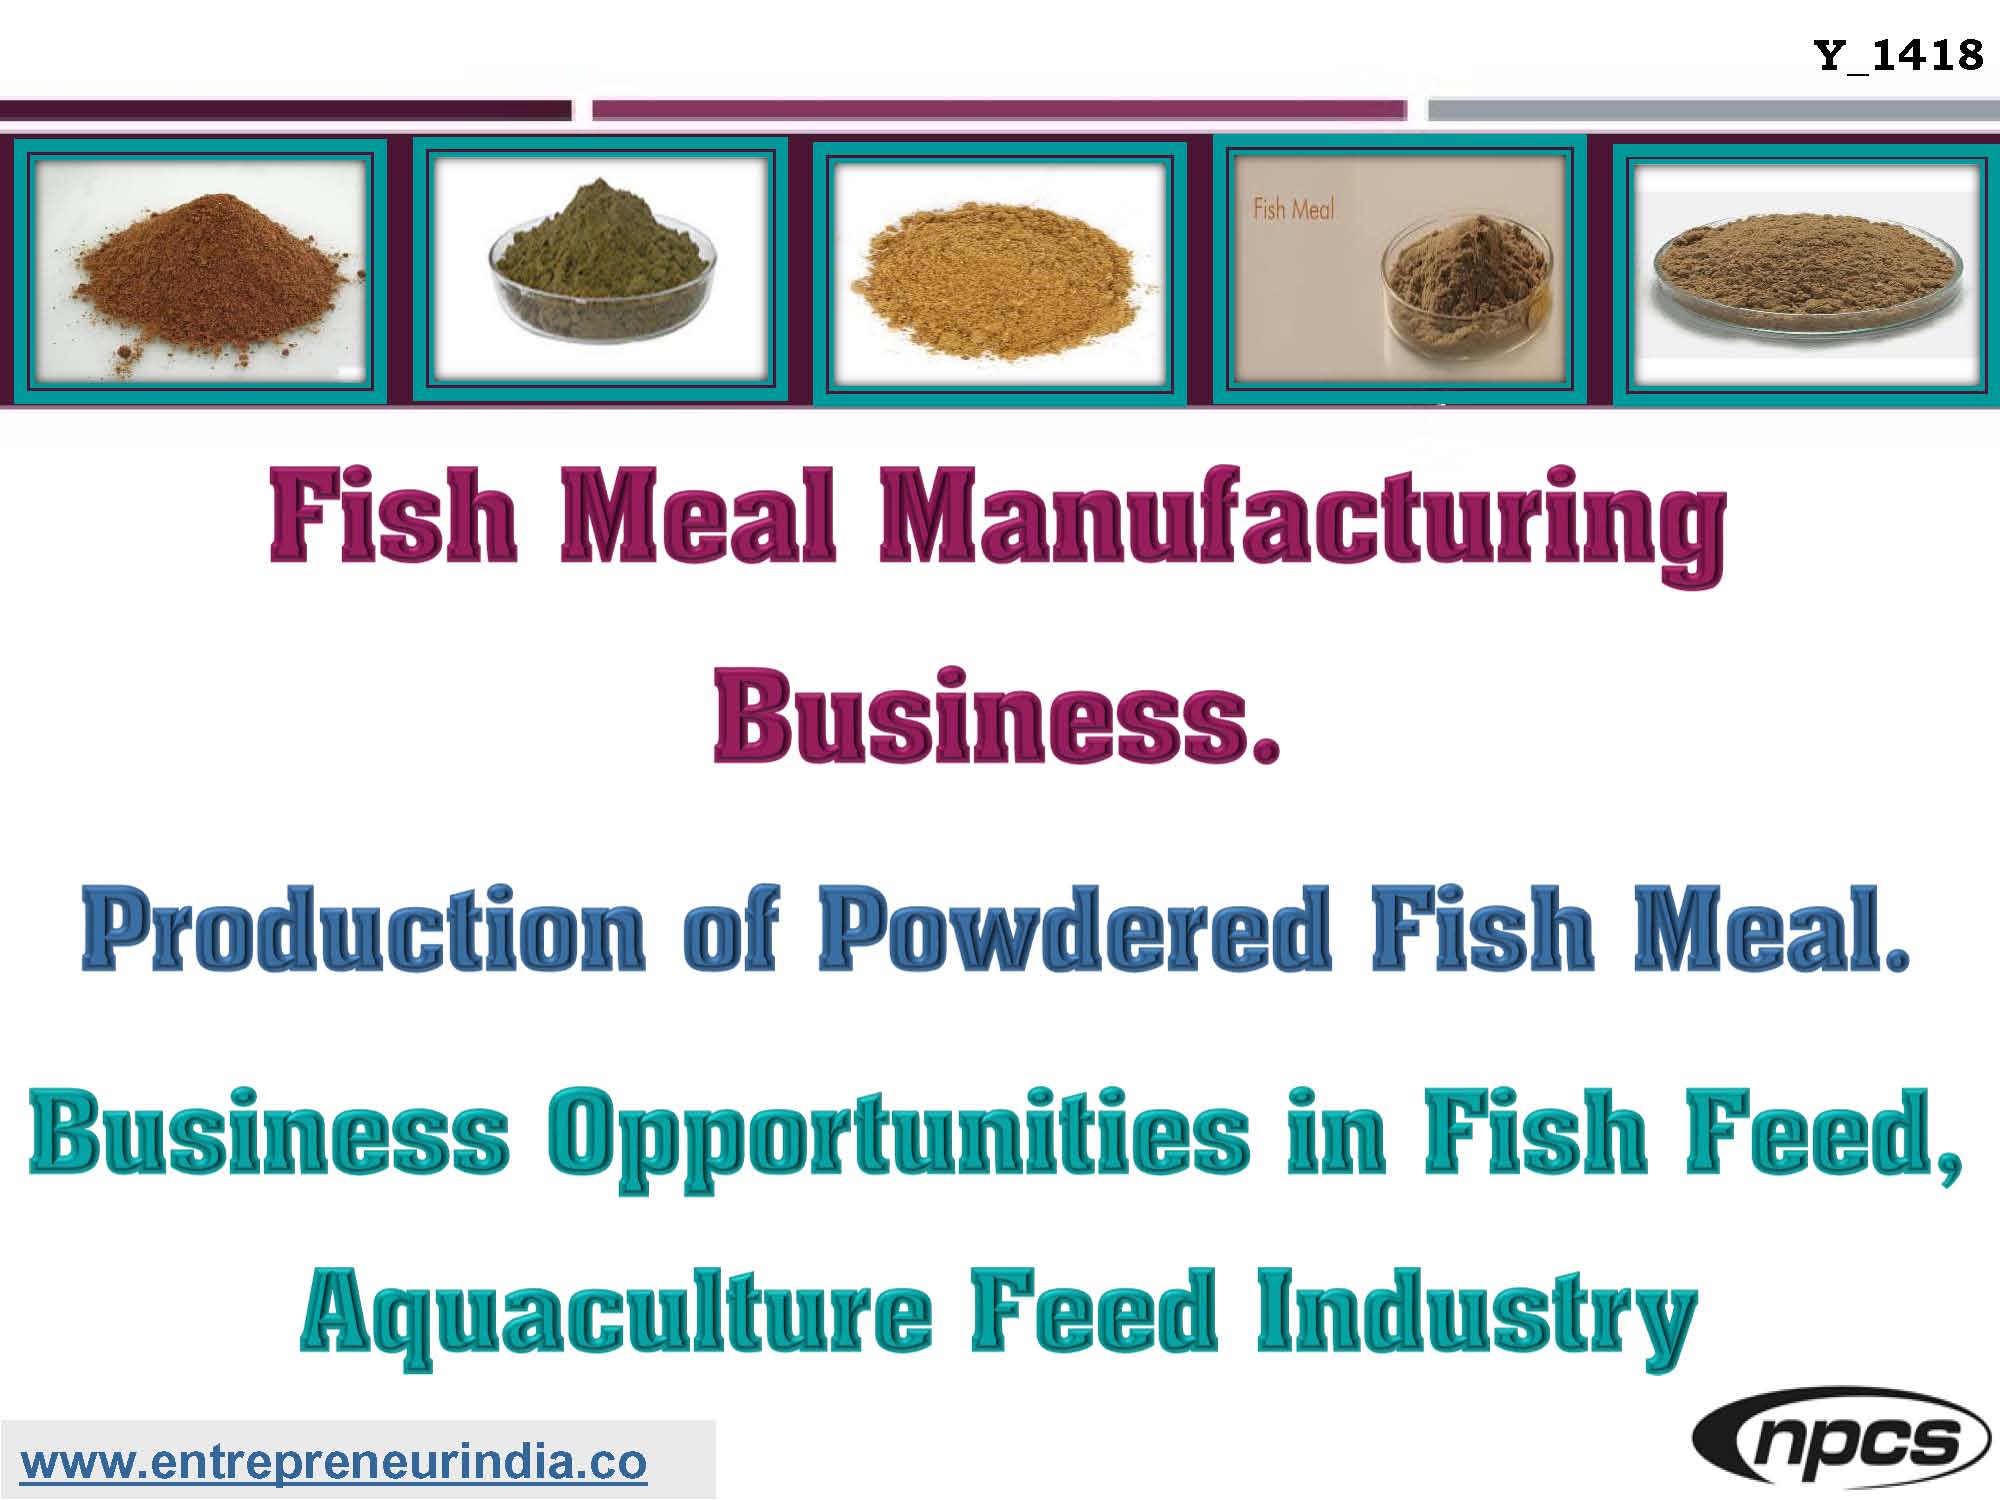 Fish Meal Manufacturing Business